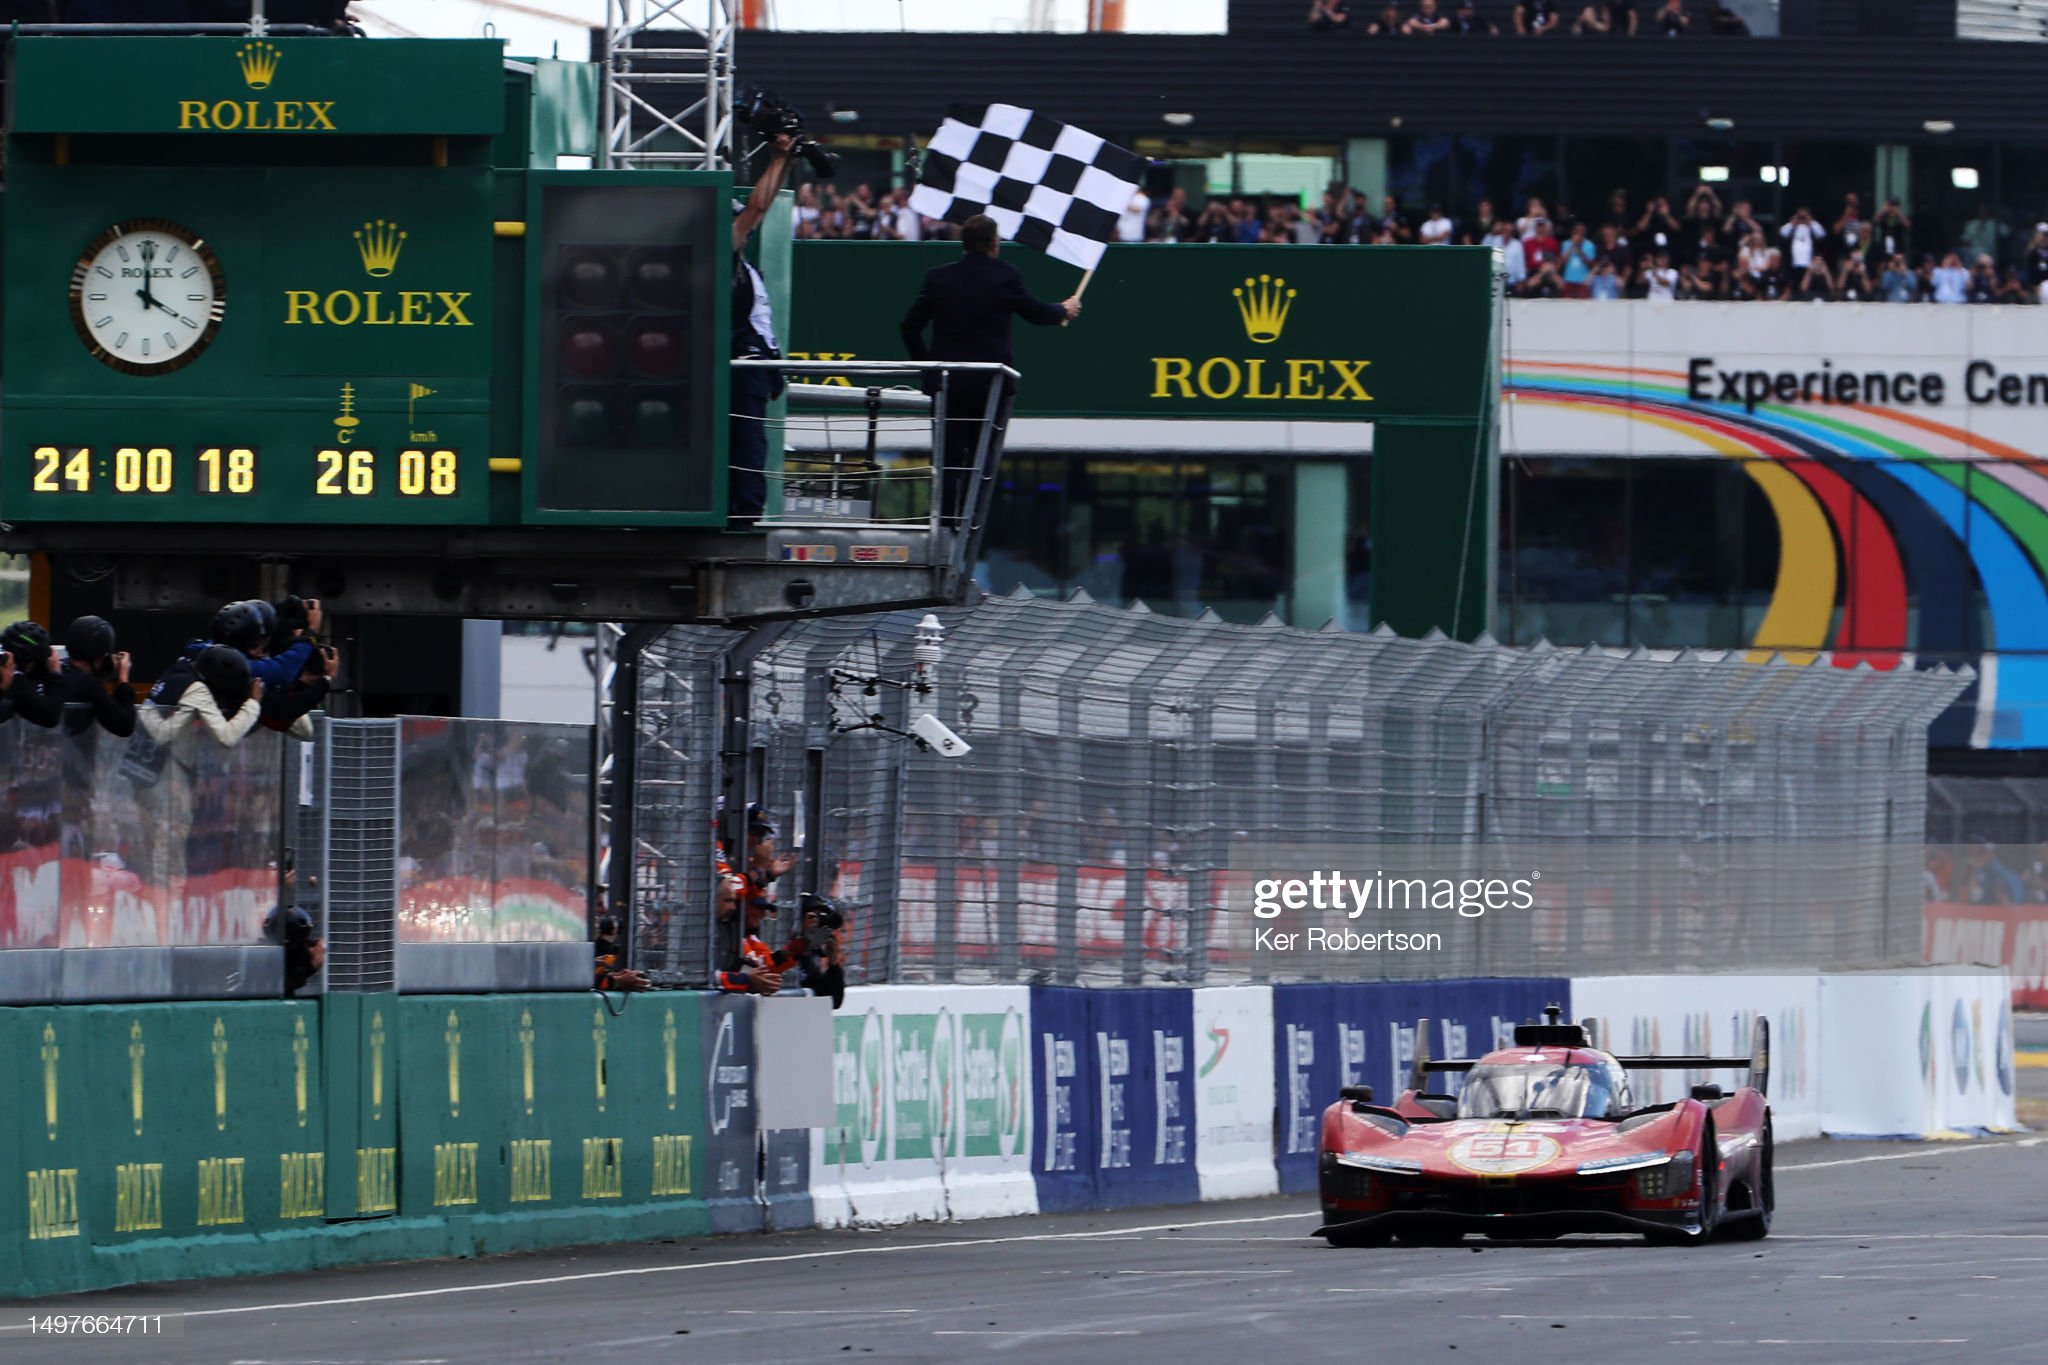 The race winning Ferrari 499P of Alessandro Pier Guidi (driving), James Calado and Antonio Giovinazzi takes the checkered flag at the finish of the 100th anniversary 24 Hours of Le Mans race at the Circuit de la Sarthe on June 11, 2023 in Le Mans, France. 